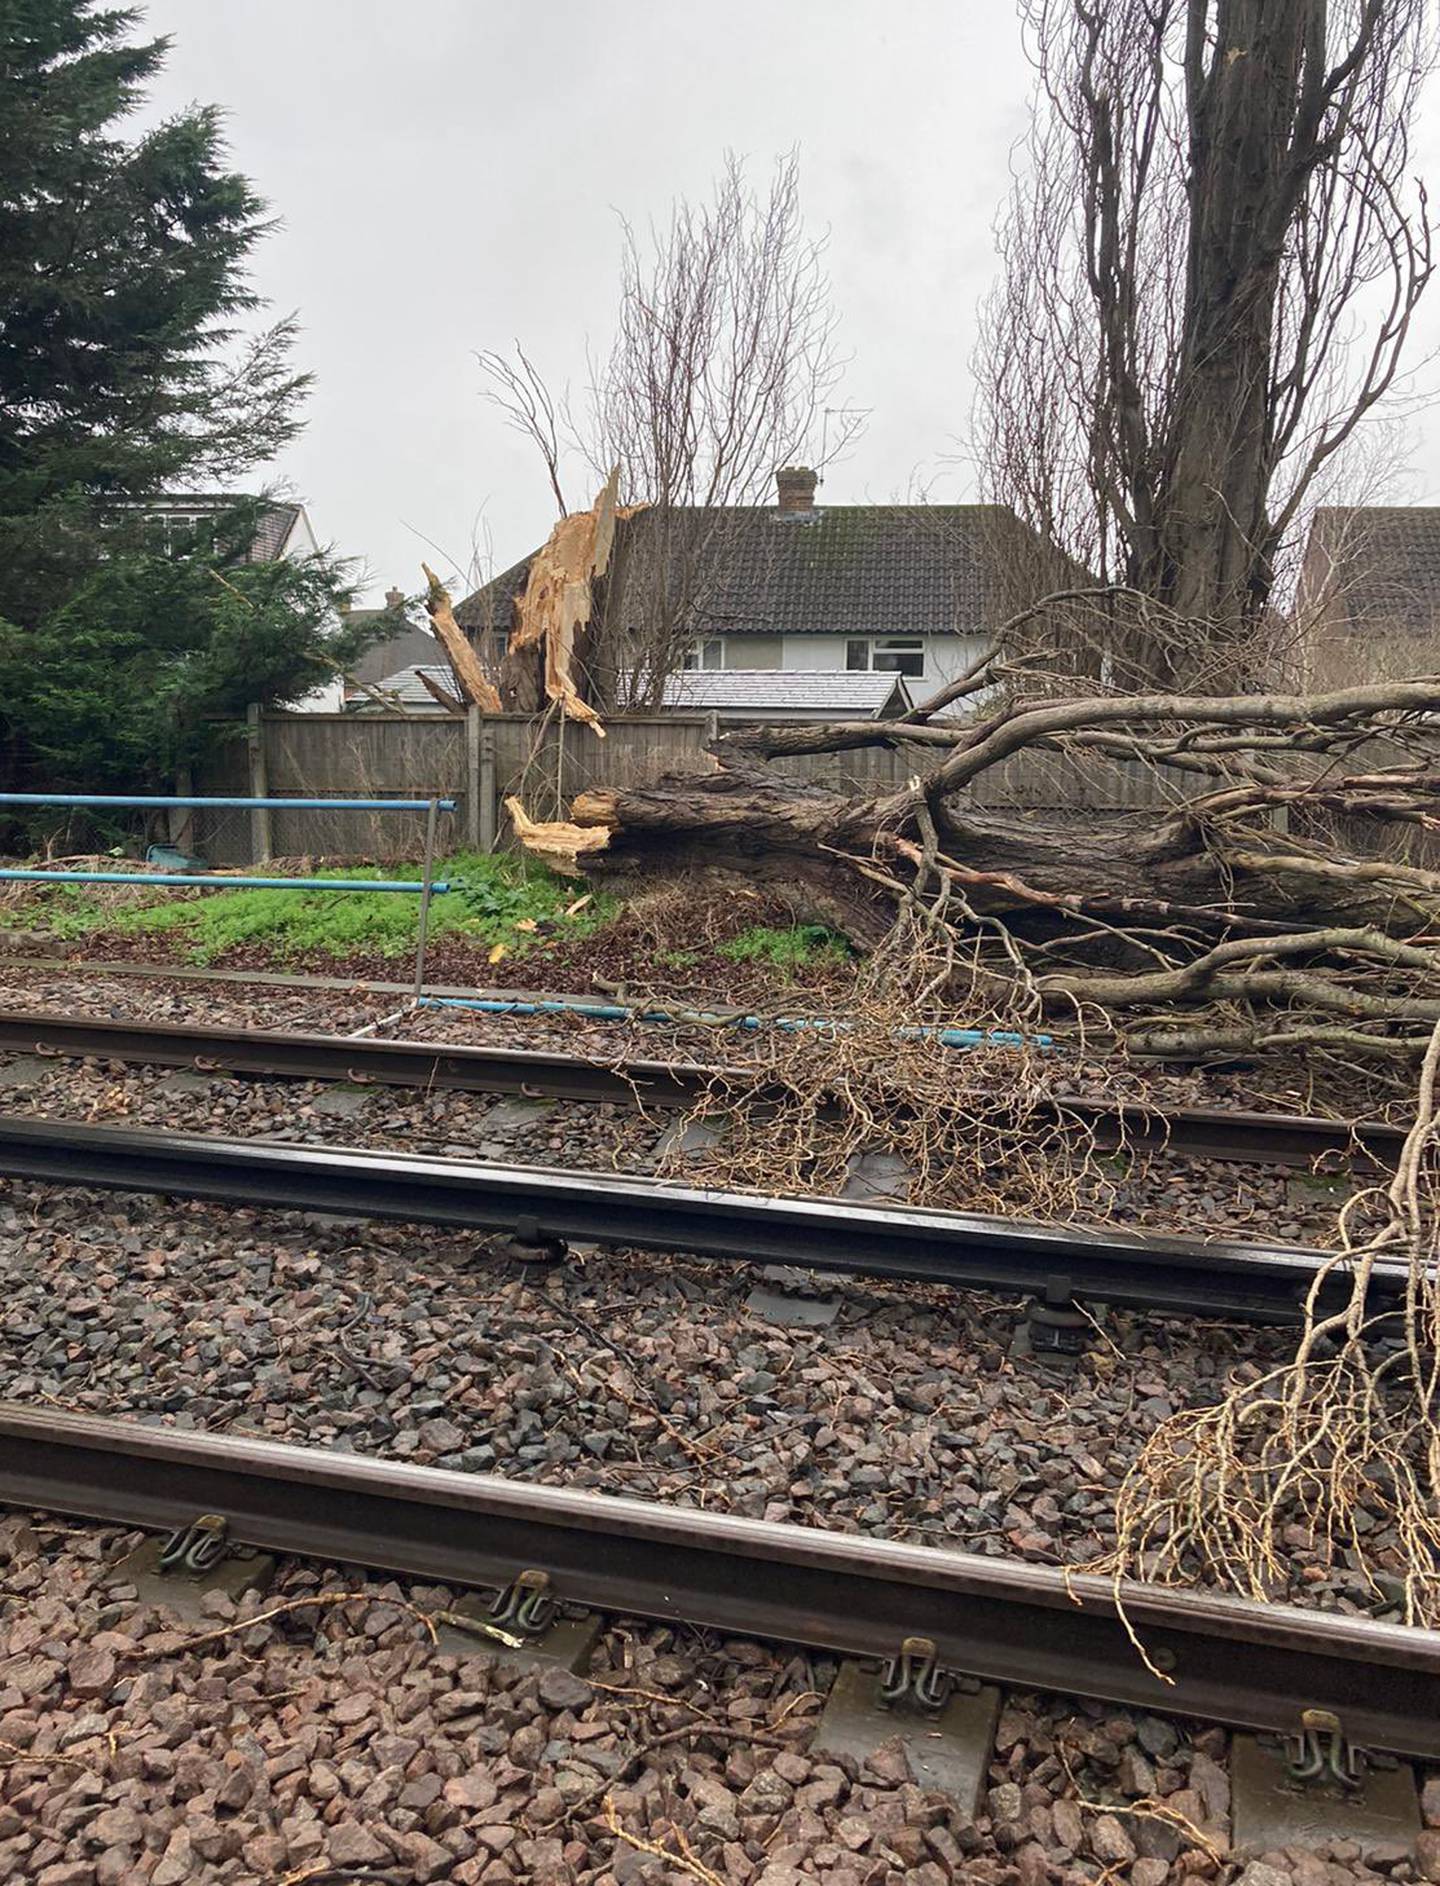 Felled trees like this one near Epsom in Surrey are disrupting rail services across the UK. Network Rail